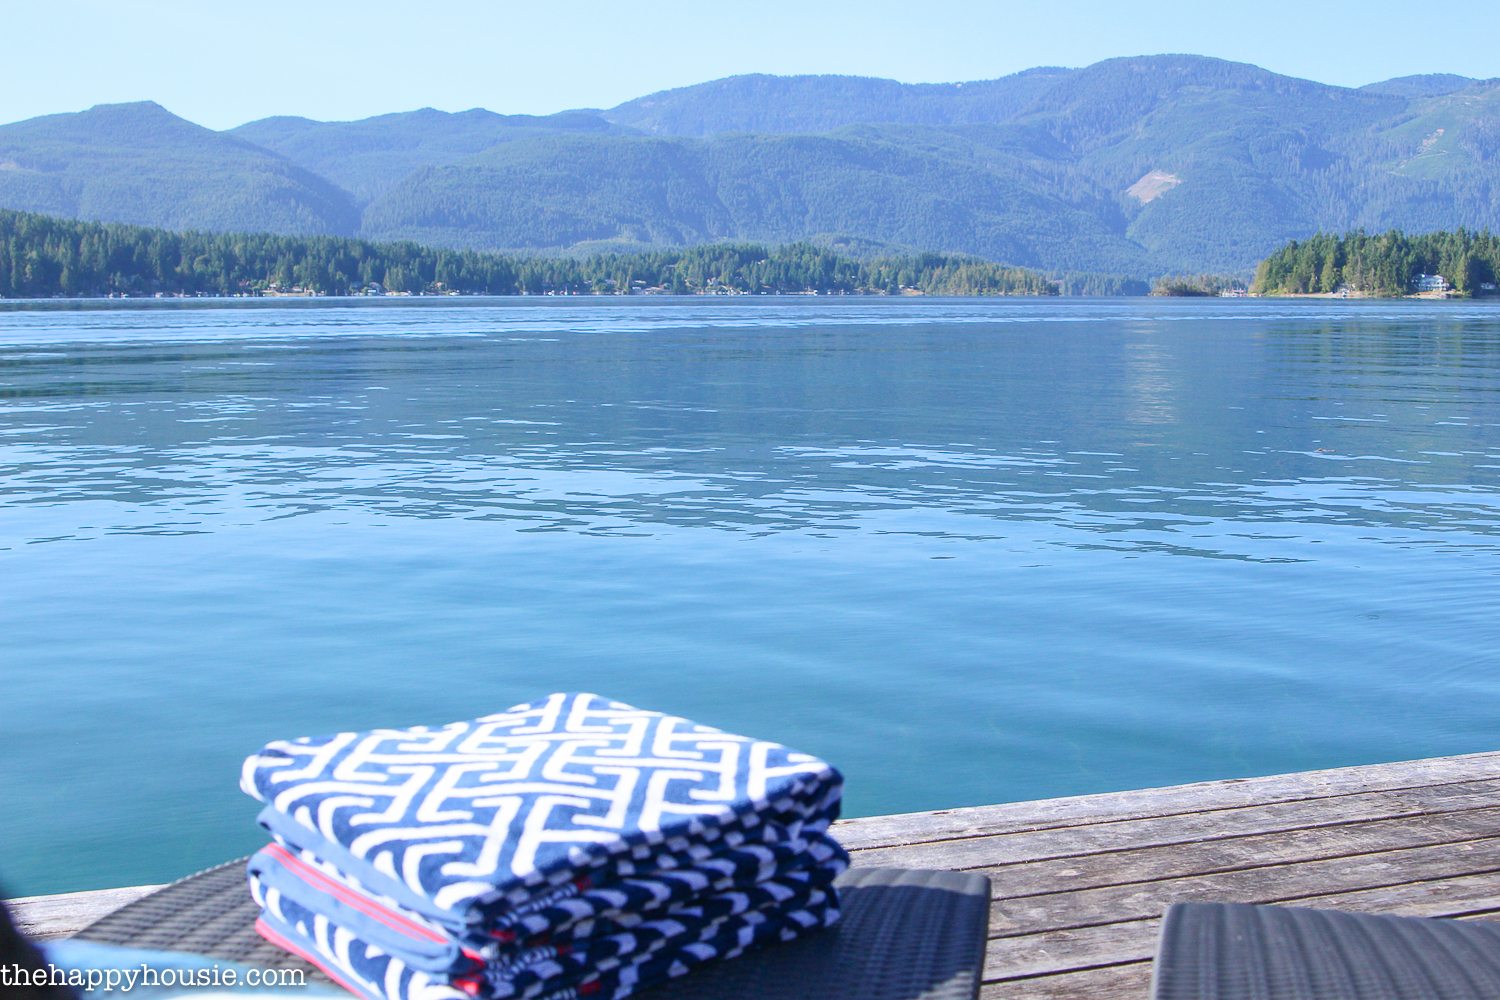 A view of the lake and a pile of towels.